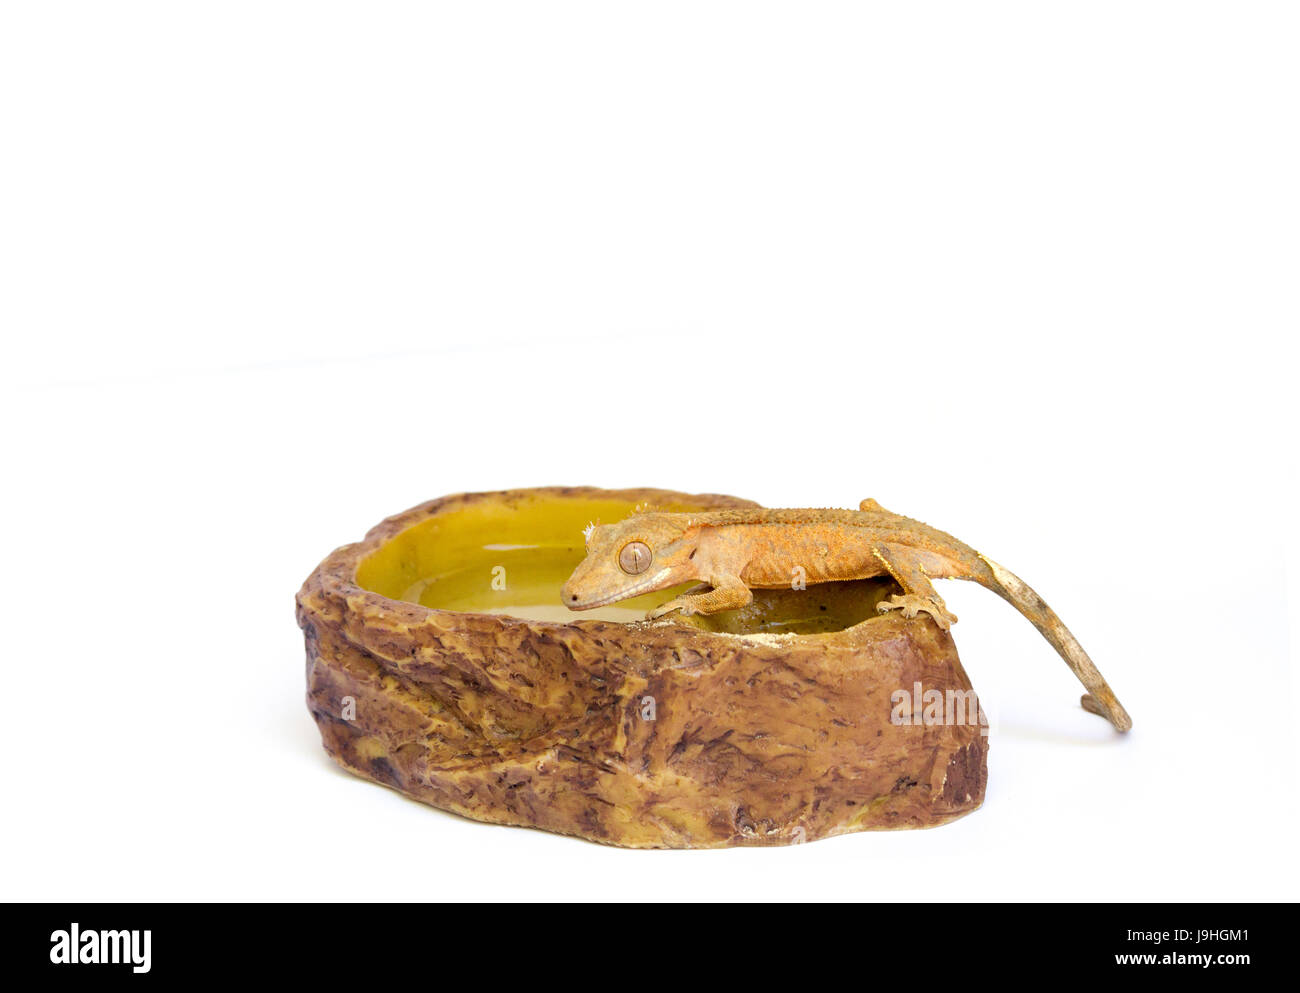 New Caledonian crested gecko (Correlophus ciliatus), also known as crested gecko, Guichenot's giant gecko, and eyelash gecko on white background Stock Photo